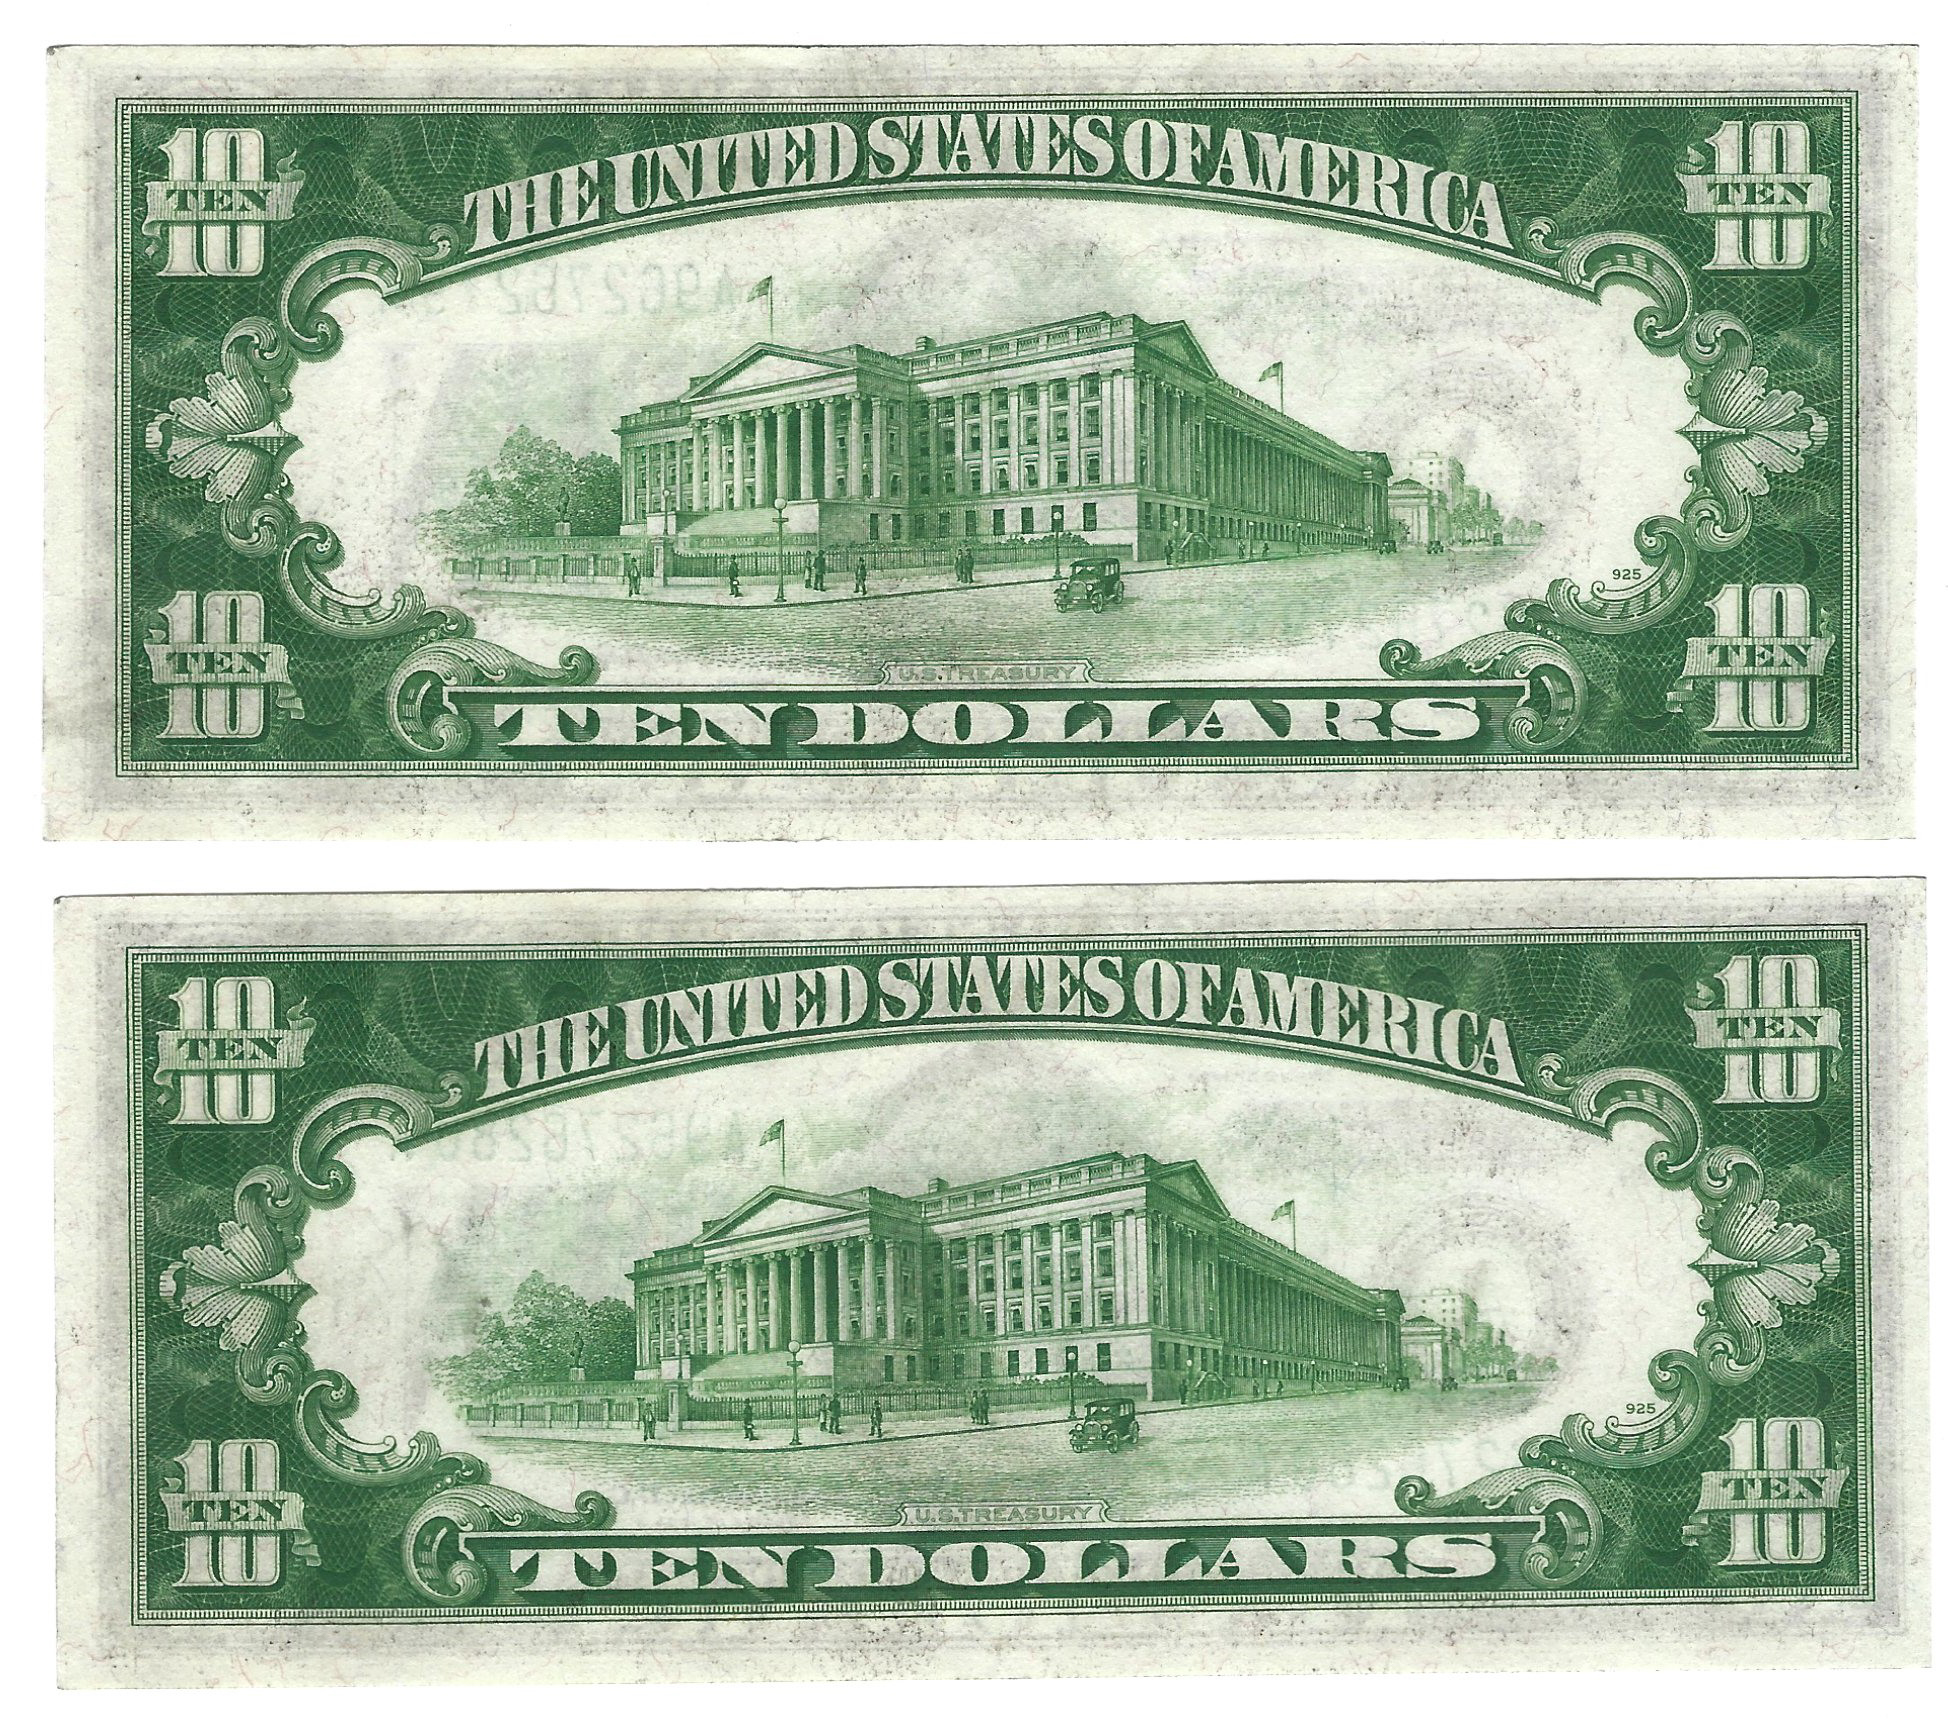 Federal Reserve Notes: Small Size, $10.00 1928 - 1950